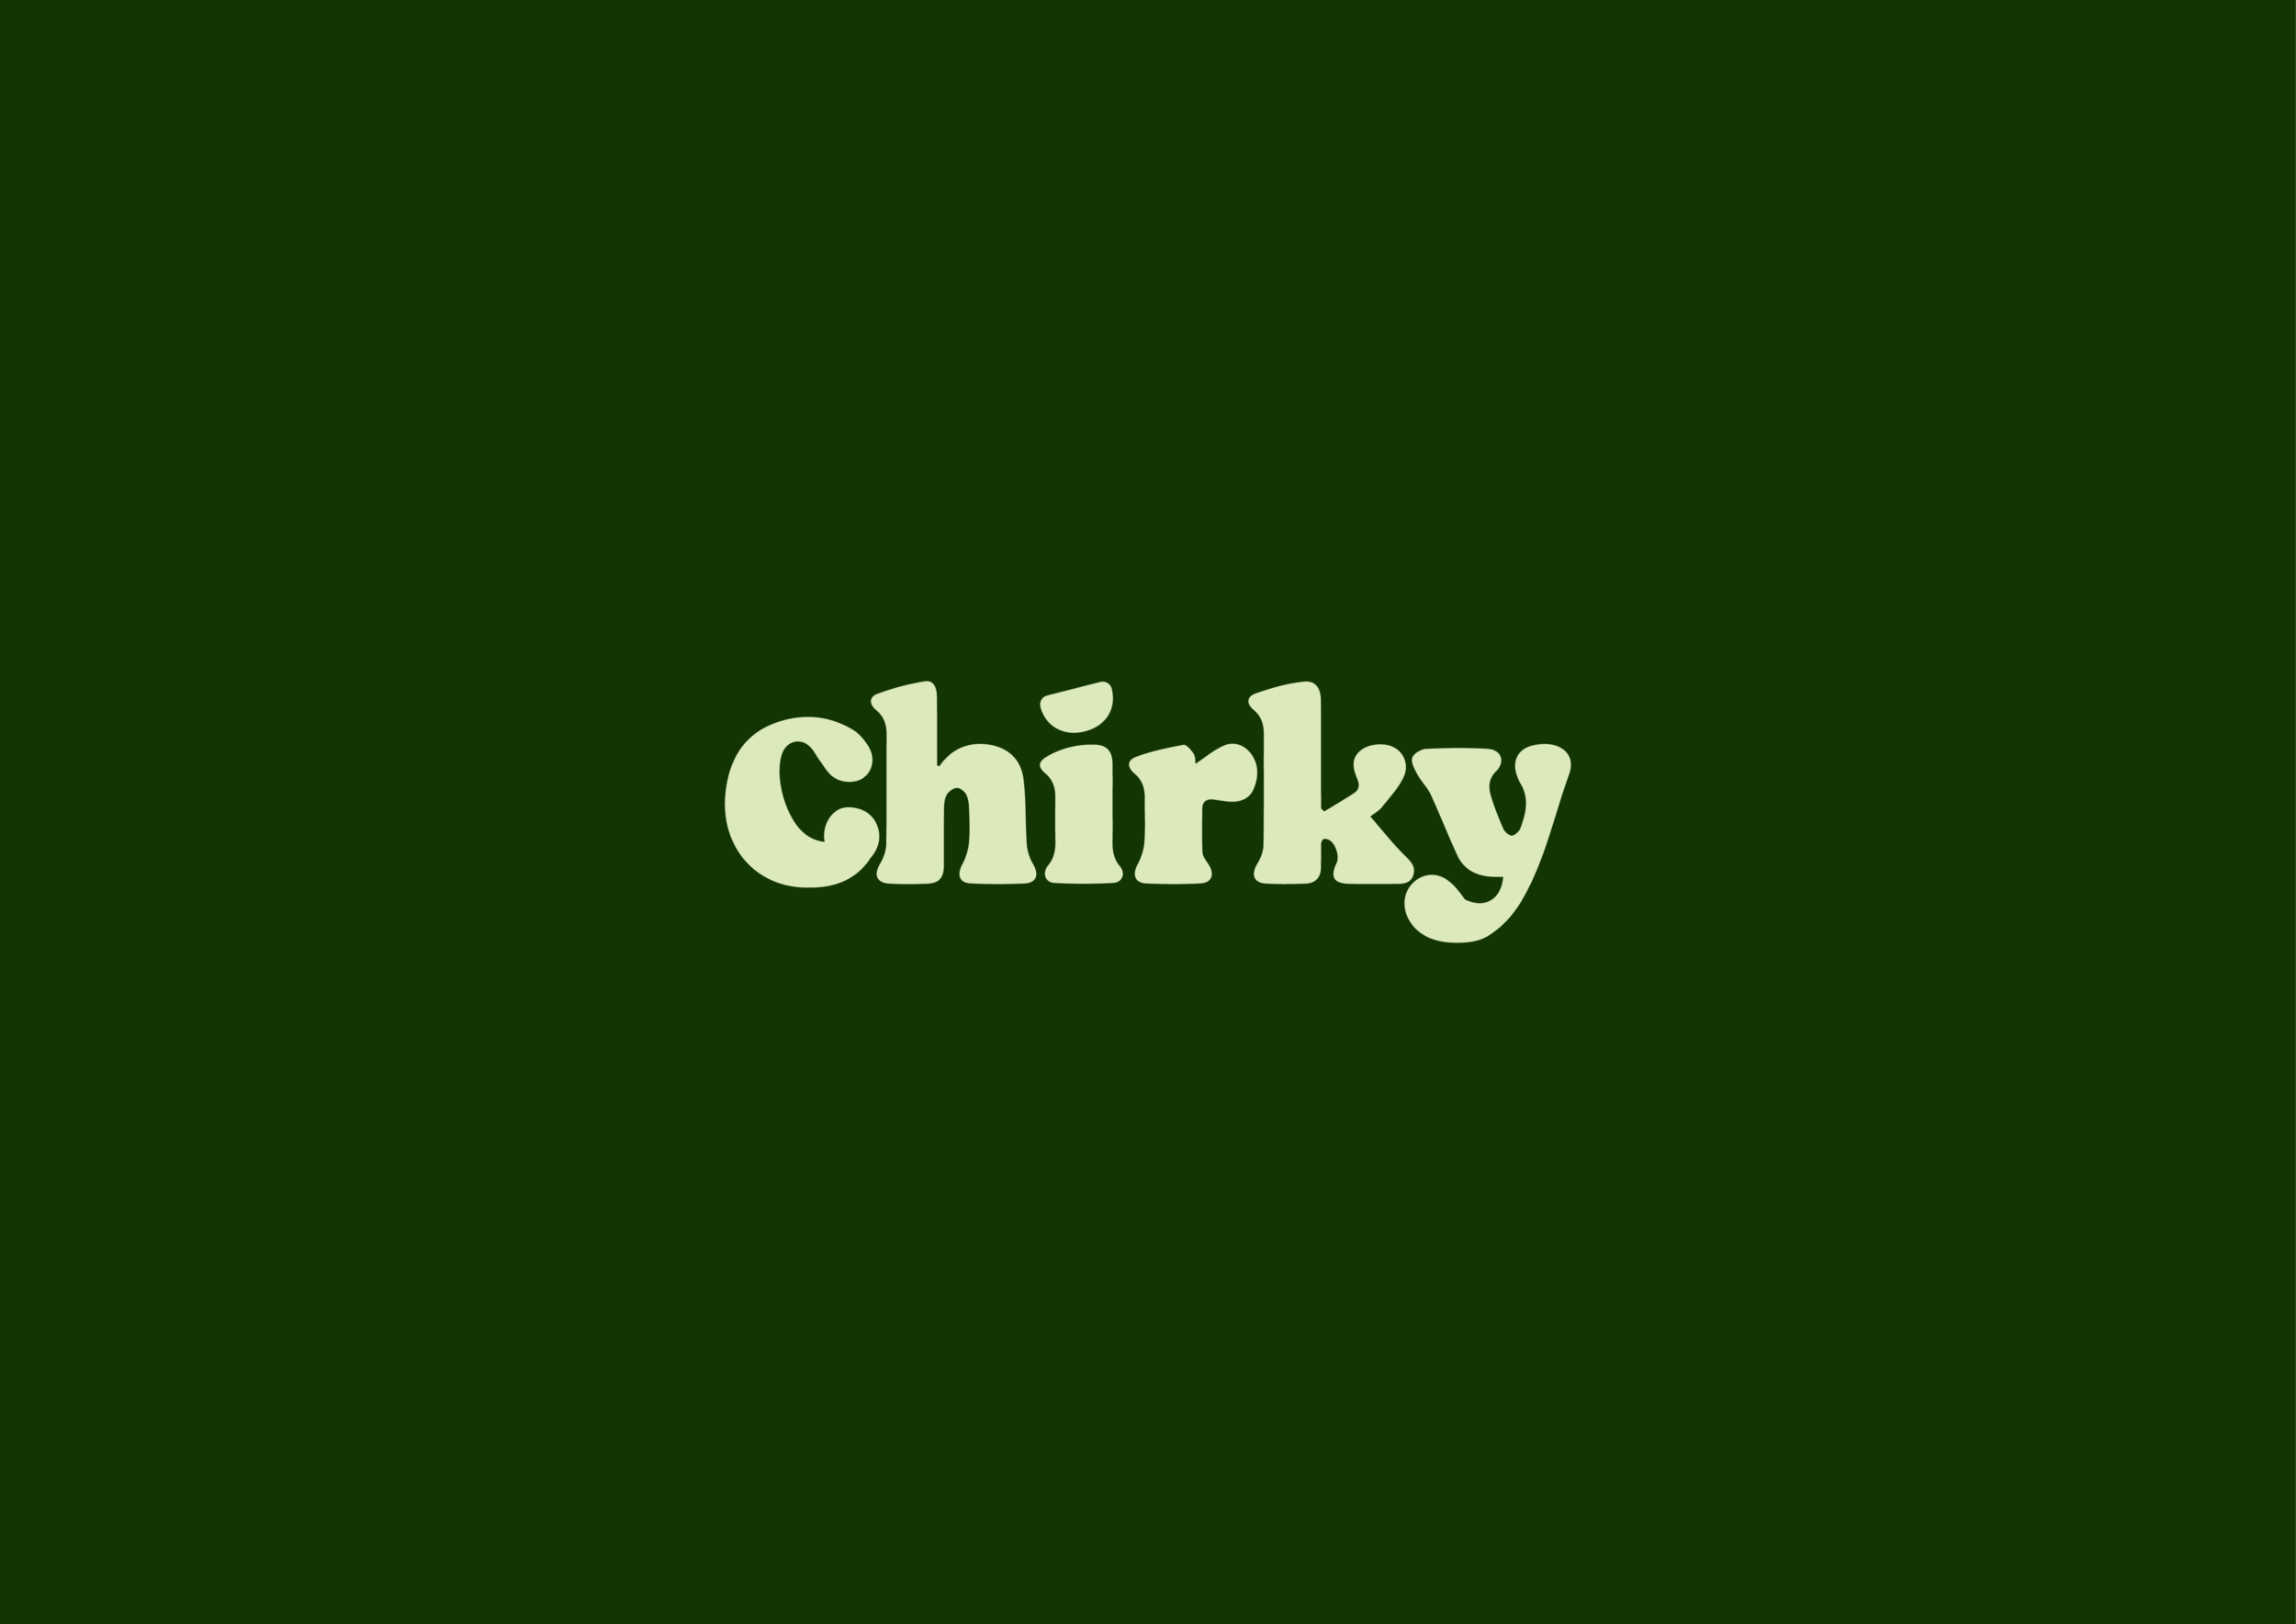 Branding Agency Leeds. Chirky company font logo with dark green background